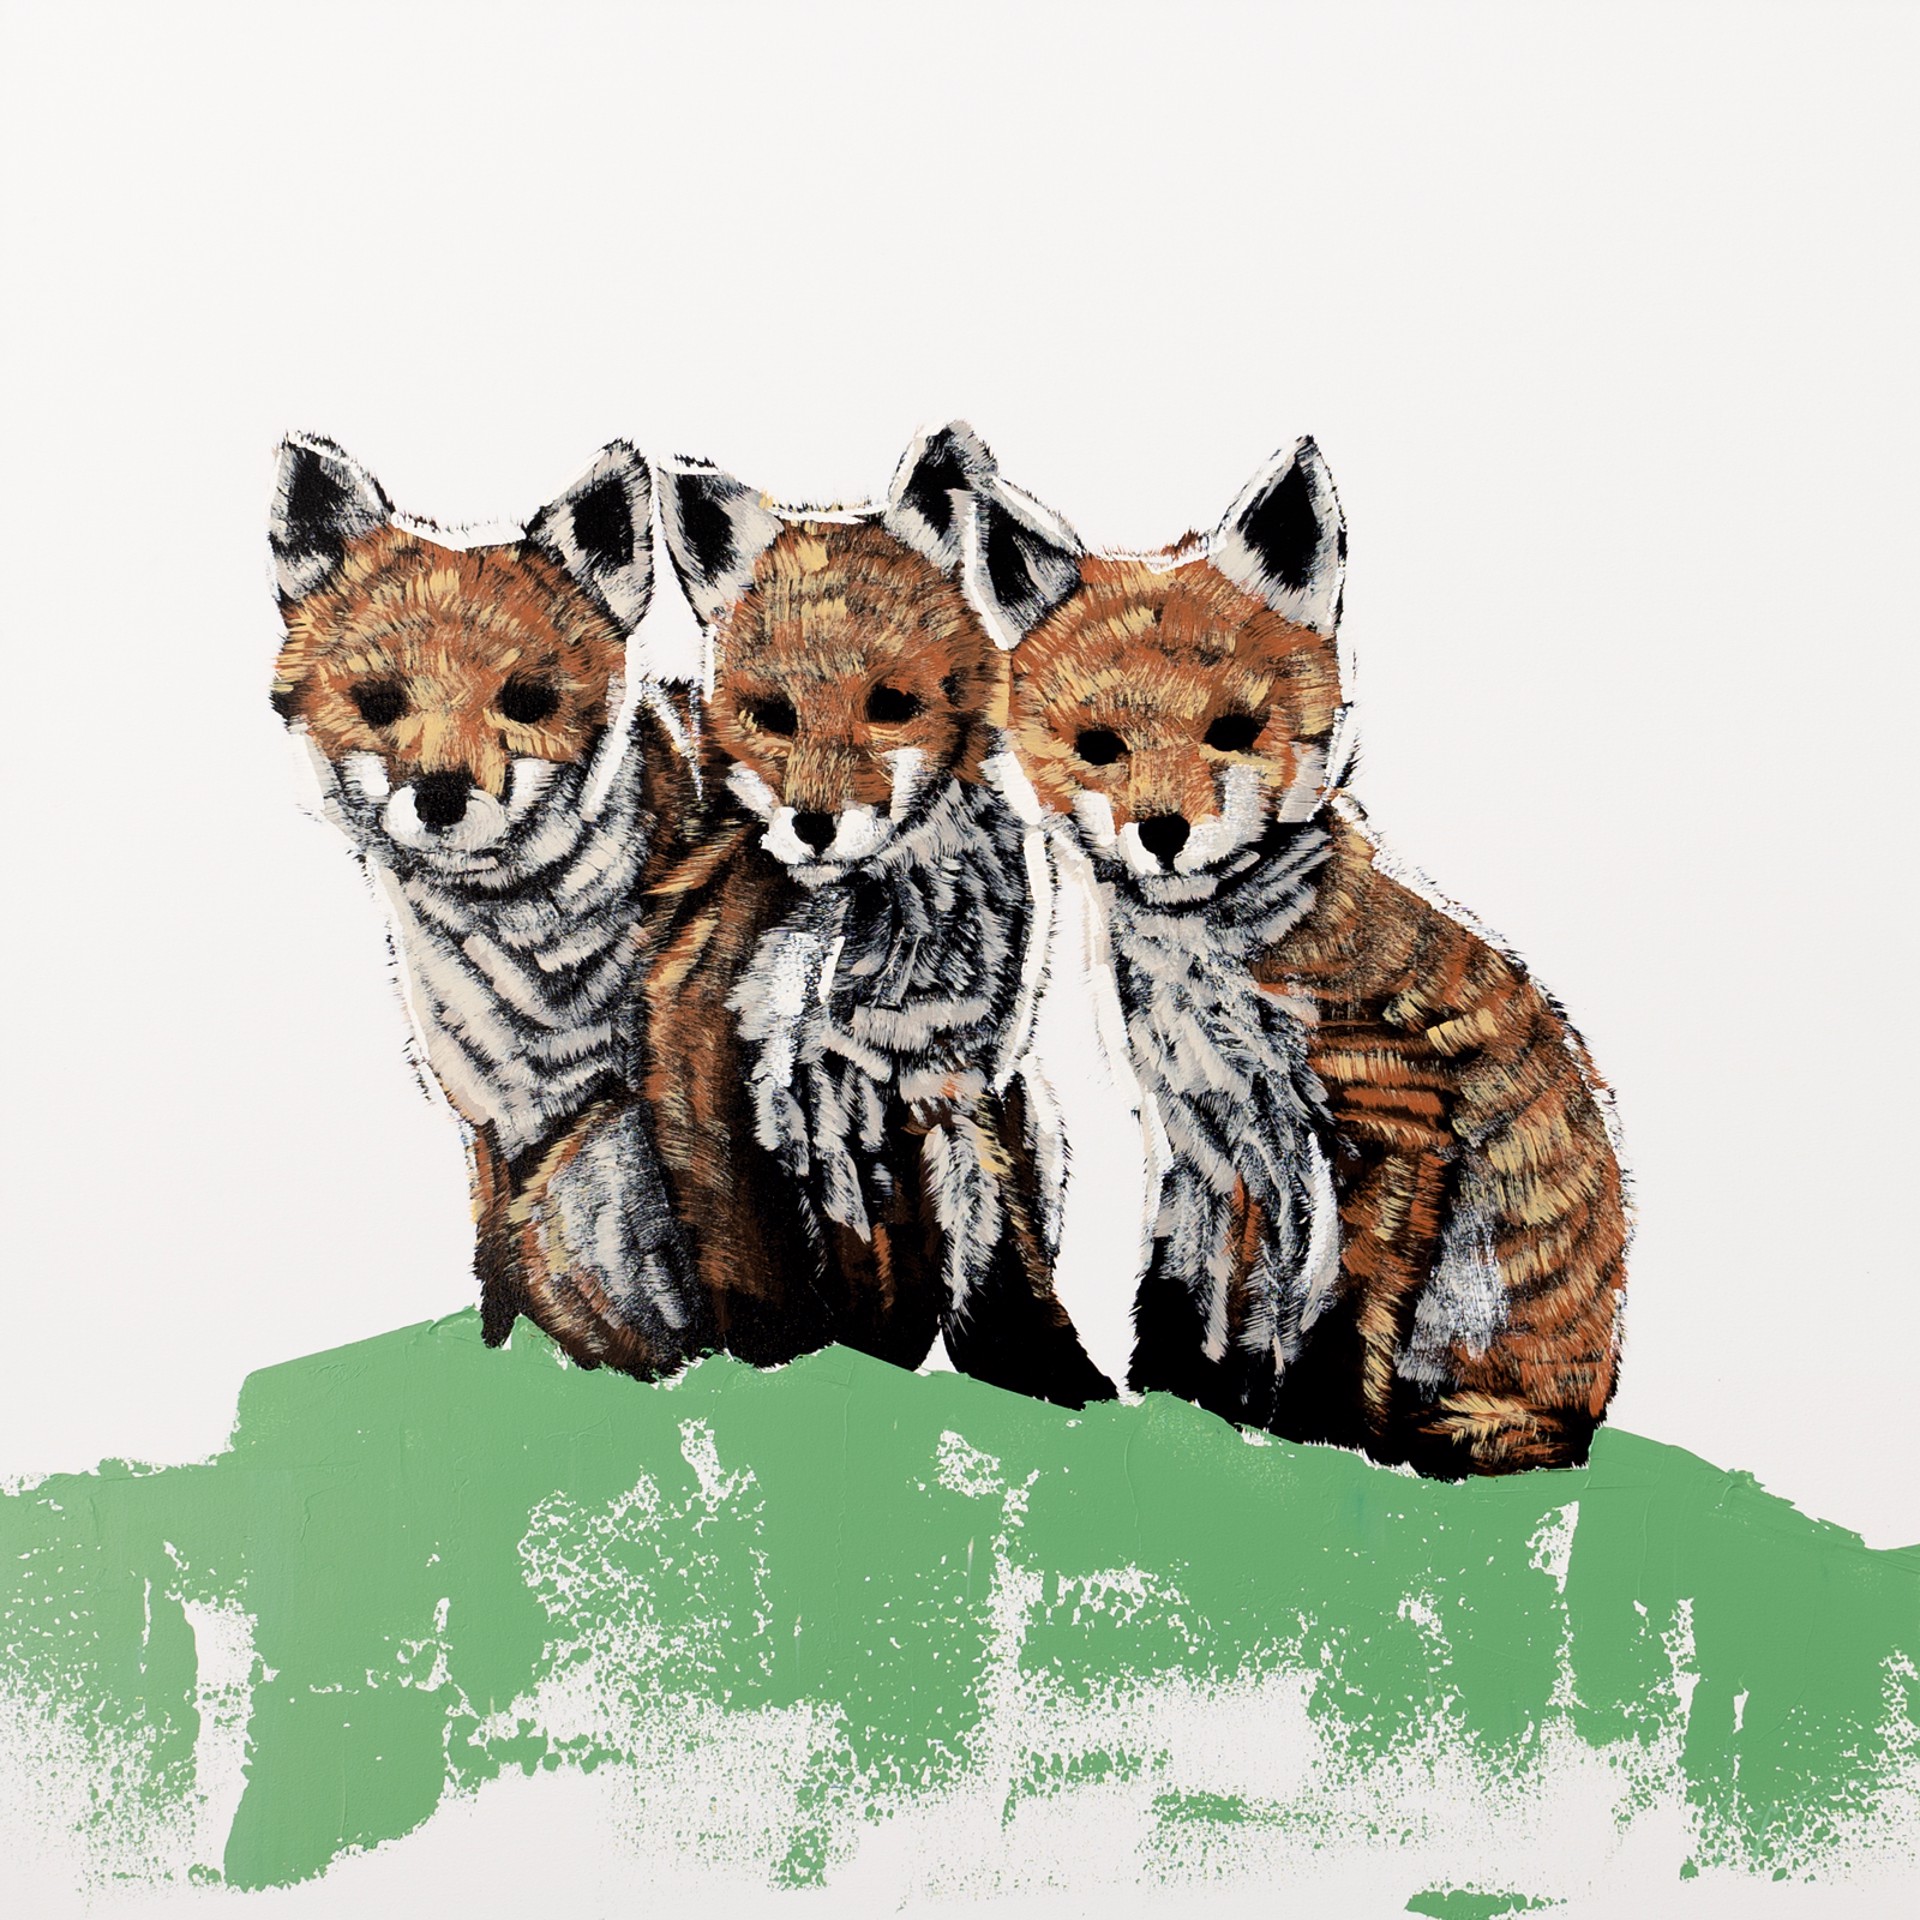 Three Foxes by Josh Brown